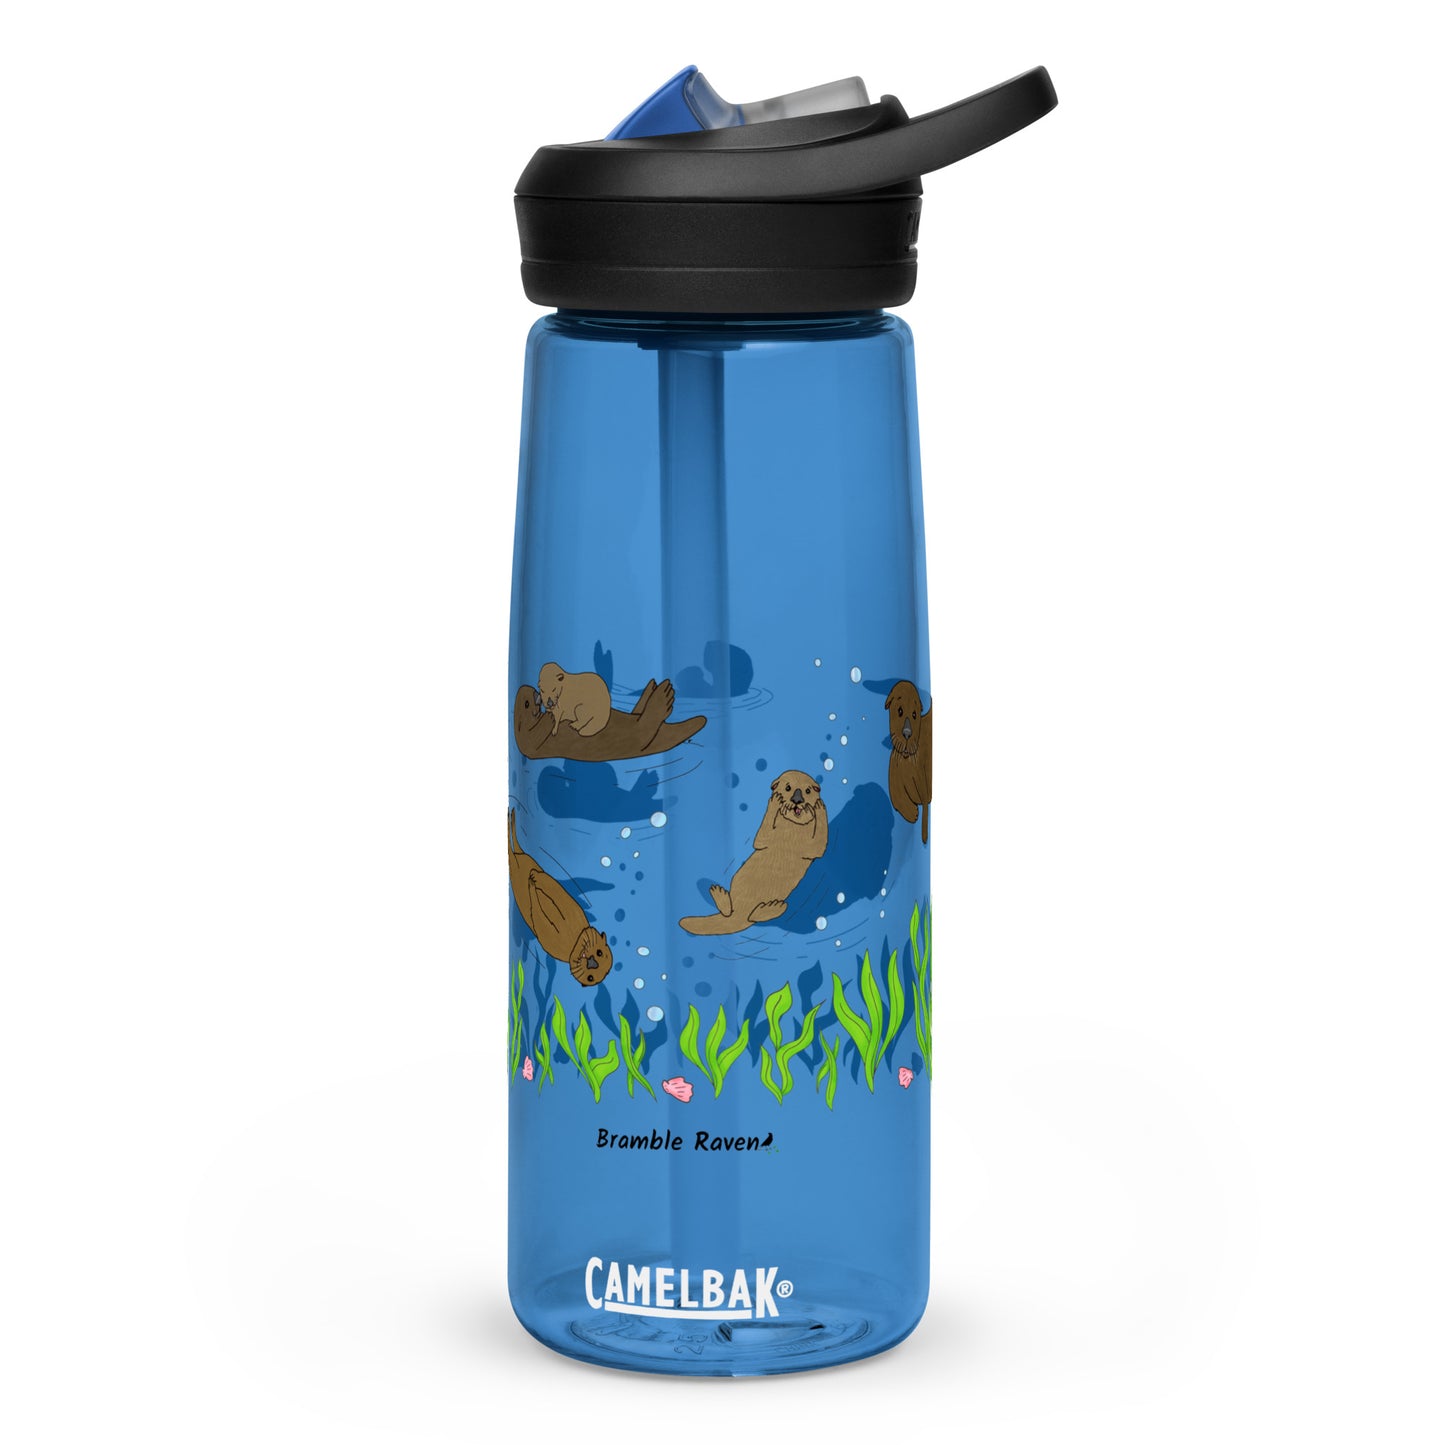 25 ounce sports water bottle with spill proof lid and bite valve. Dark blue stain and odor-resistant BPA-free plastic with sea otter designs around the bottle, swimming above the seaweed and shells.